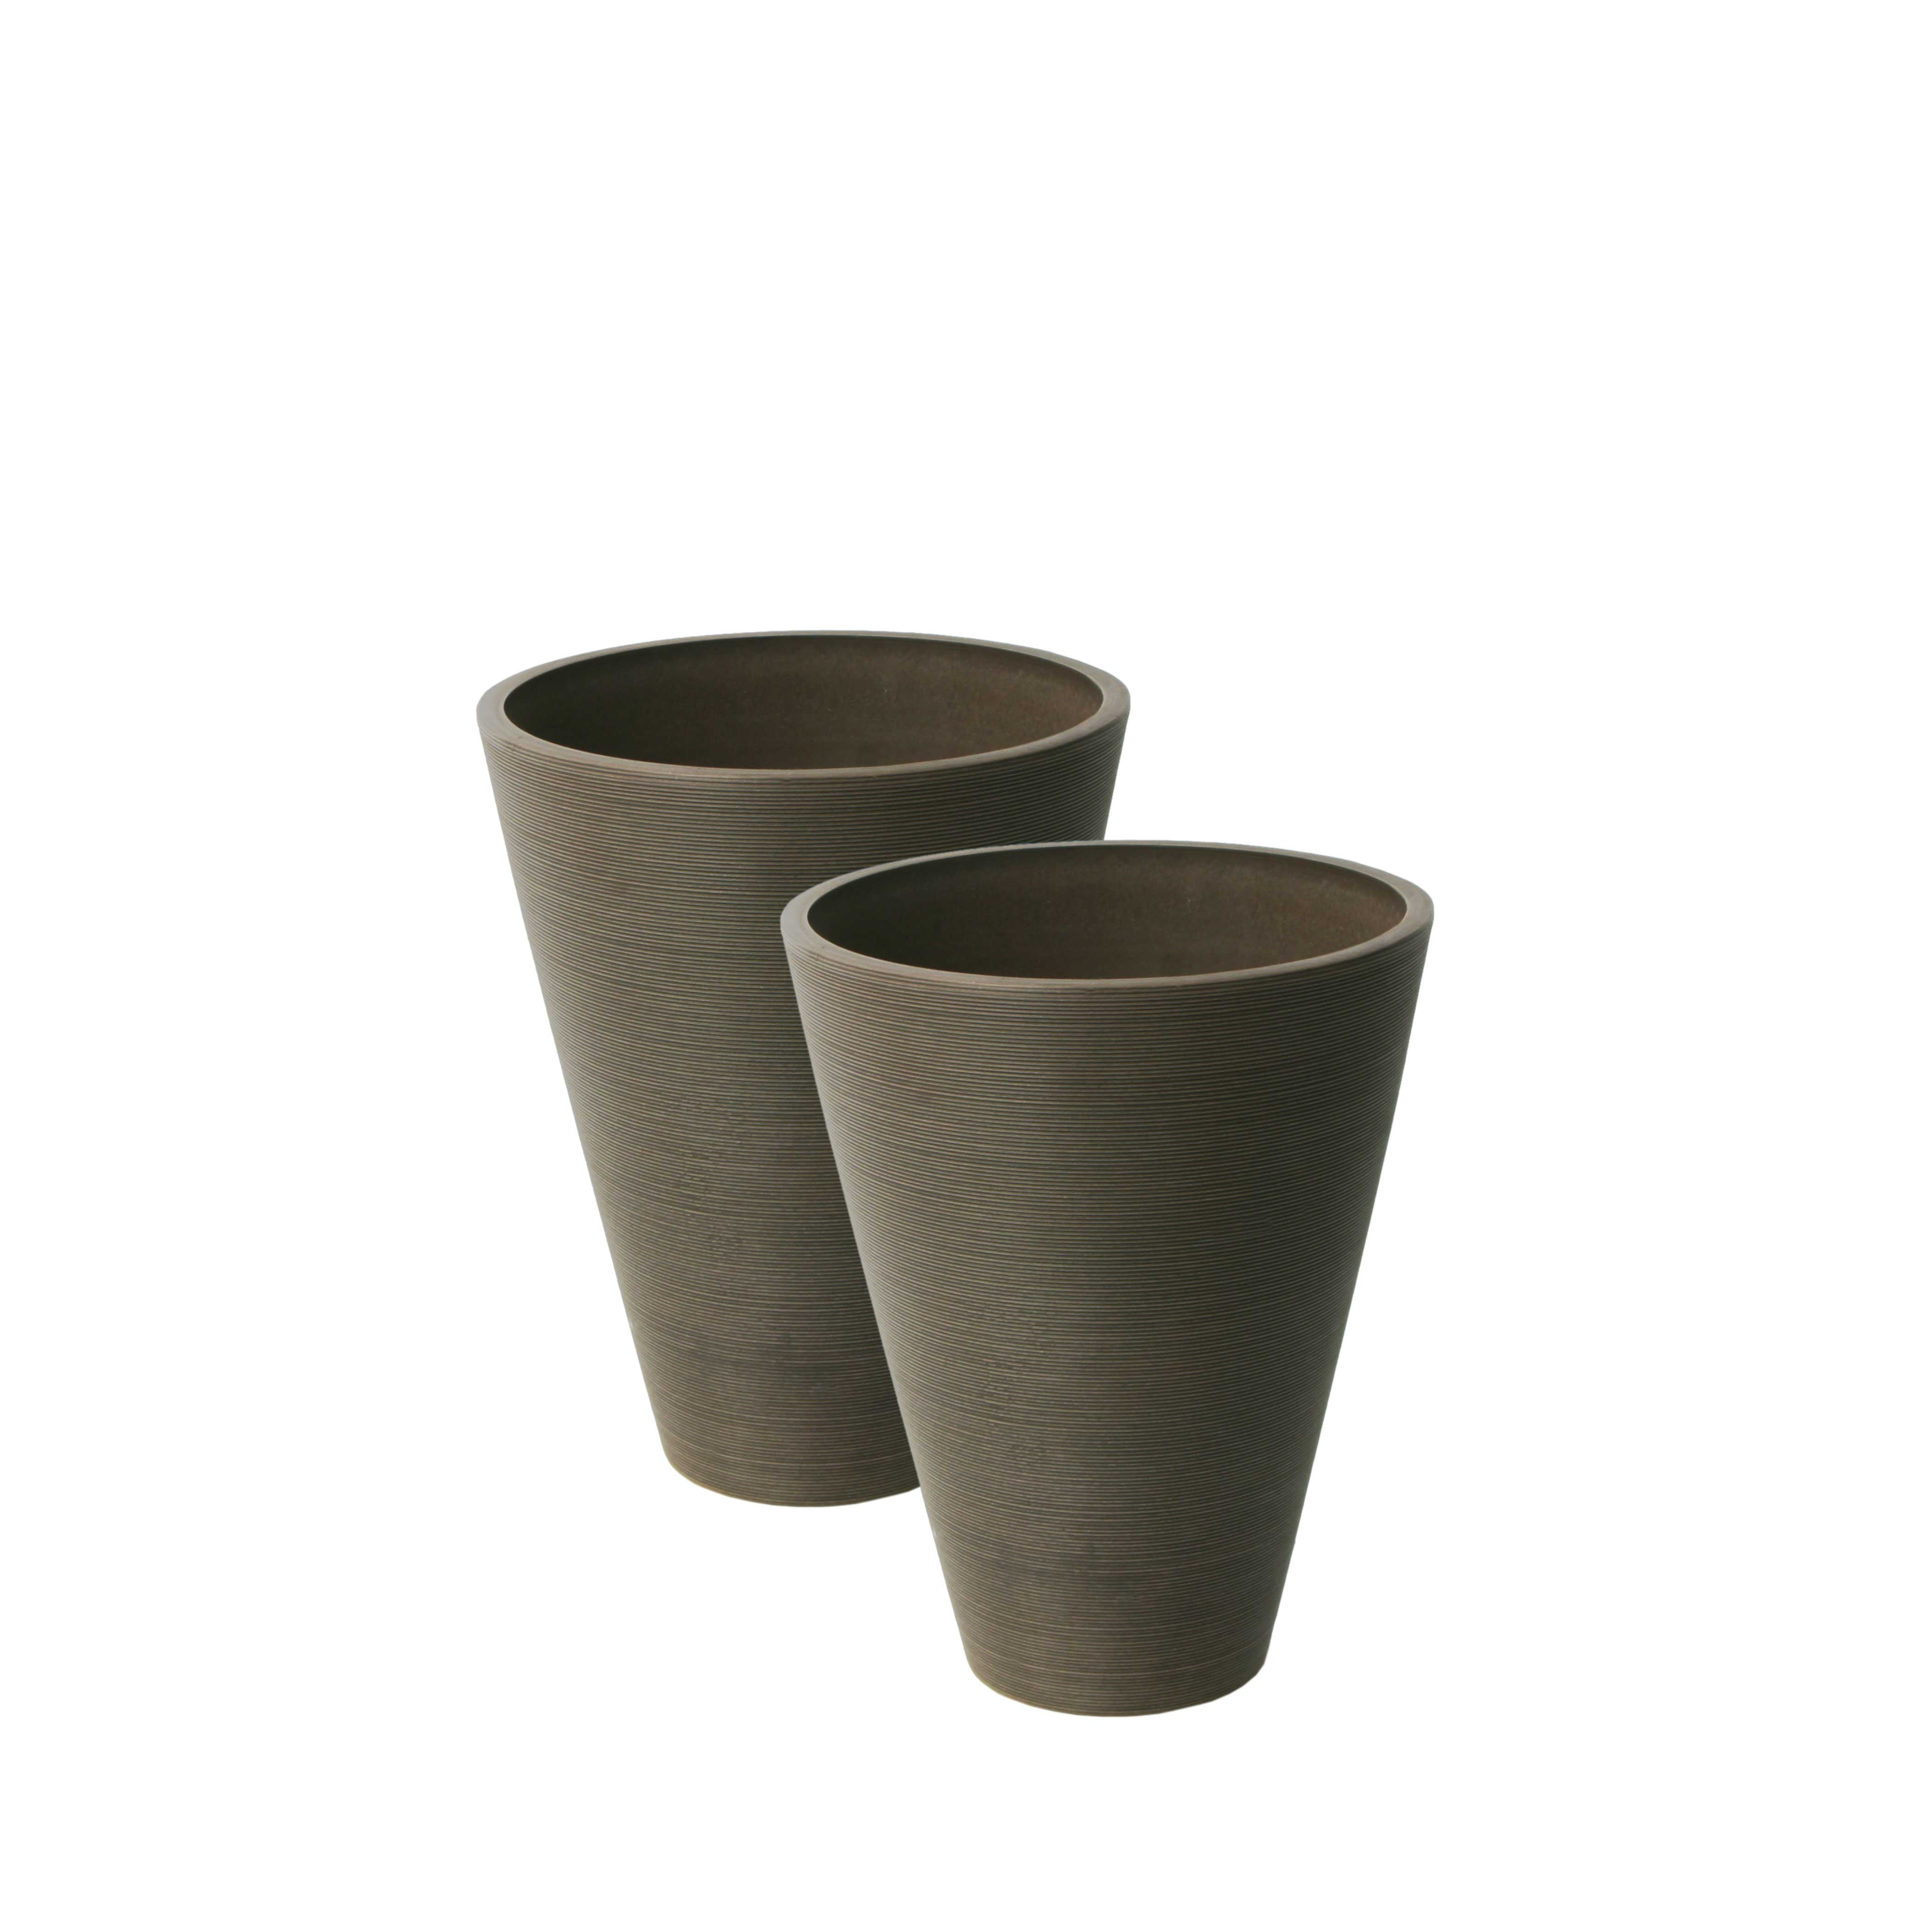 16128 Valencia 11.4 In. Dia. By 14 In. 2 Round Taper Ribbed Planters, Chocolate - Pack Of 2